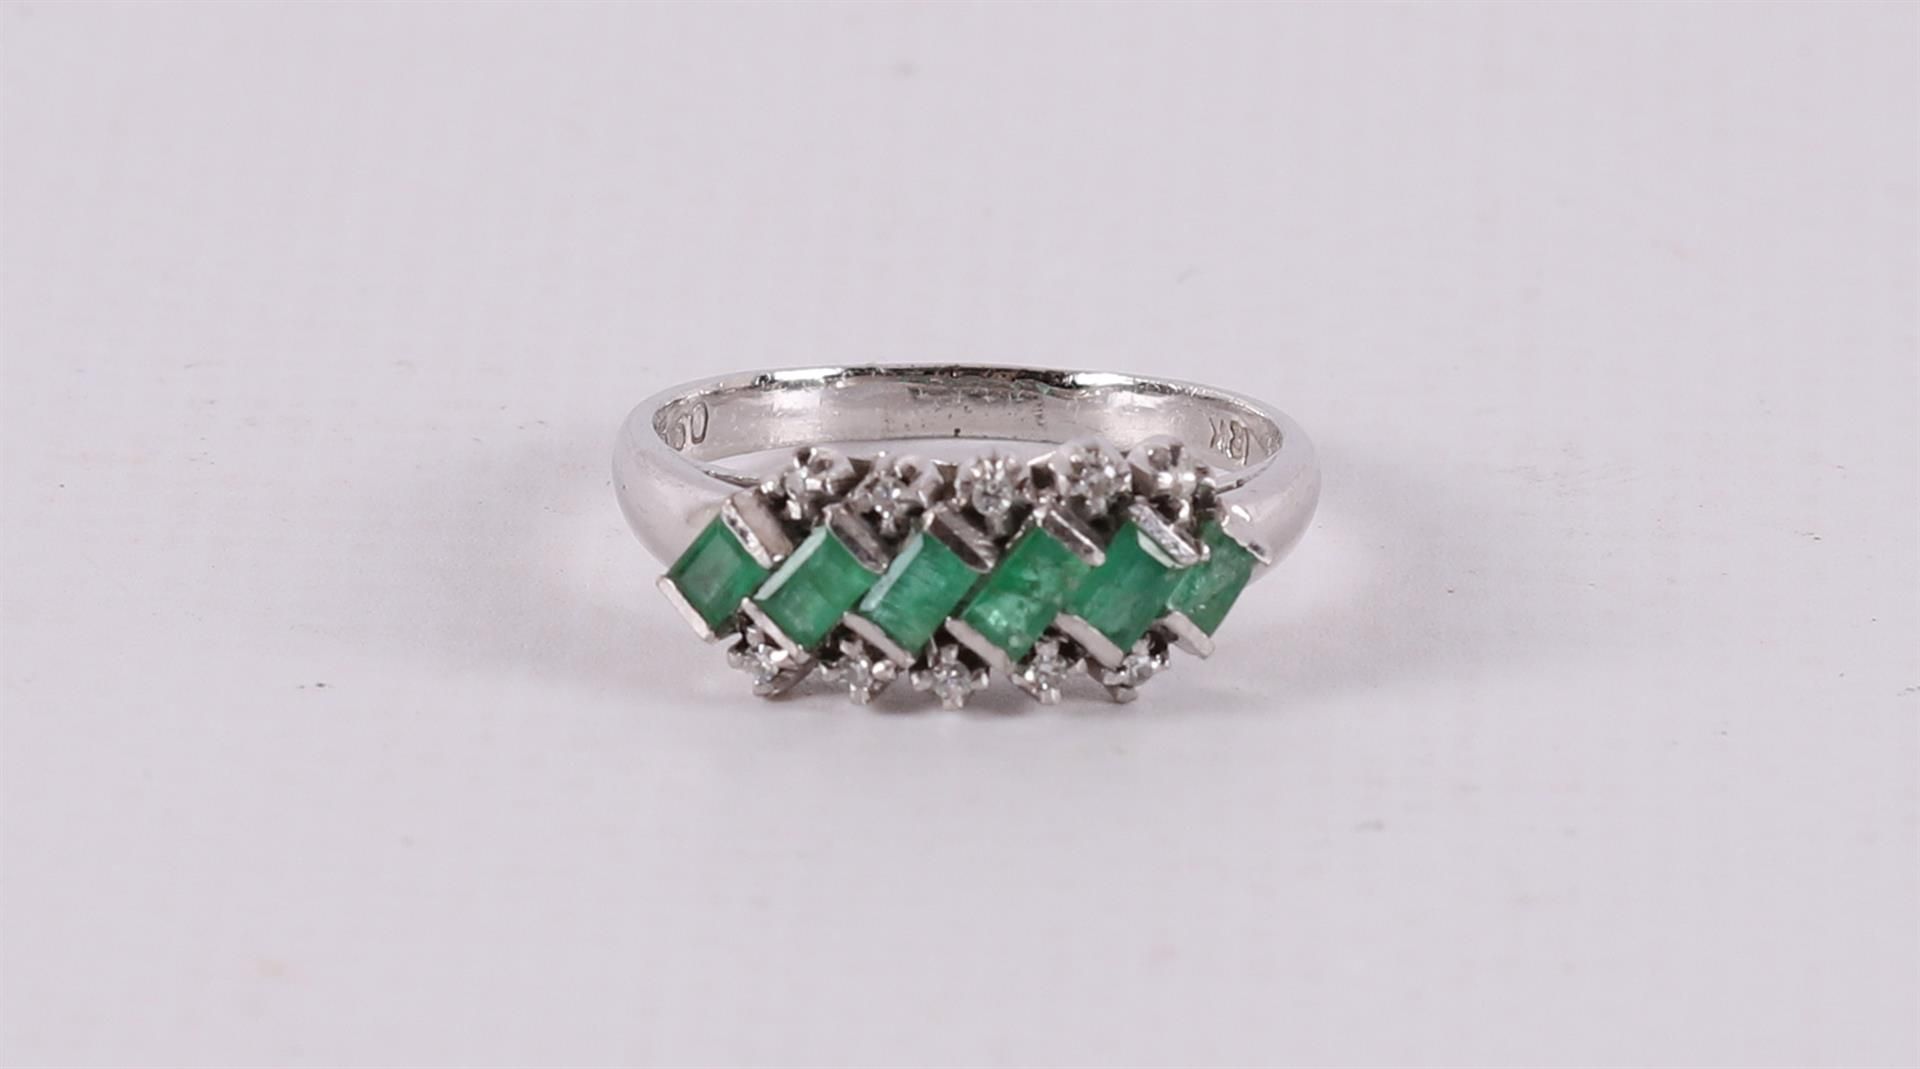 An 18 kt white gold Art Deco ring with 6 cut emeralds and 8 diamonds.